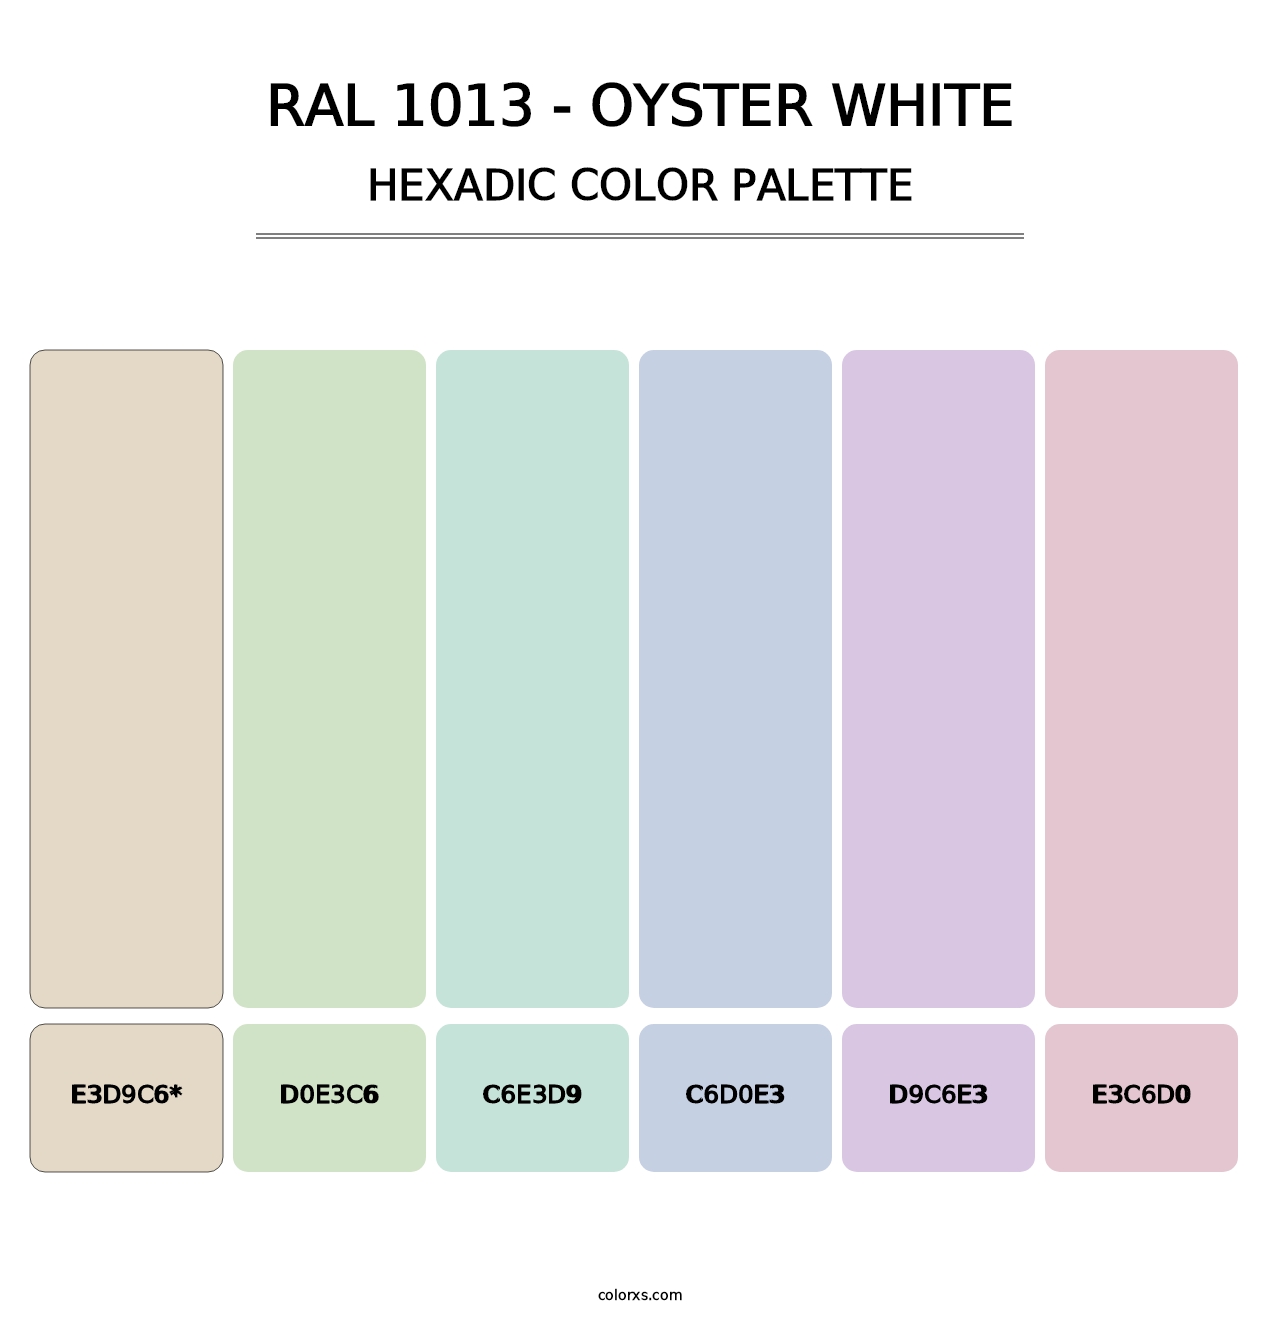 RAL 1013 - Oyster White - Hexadic Color Palette